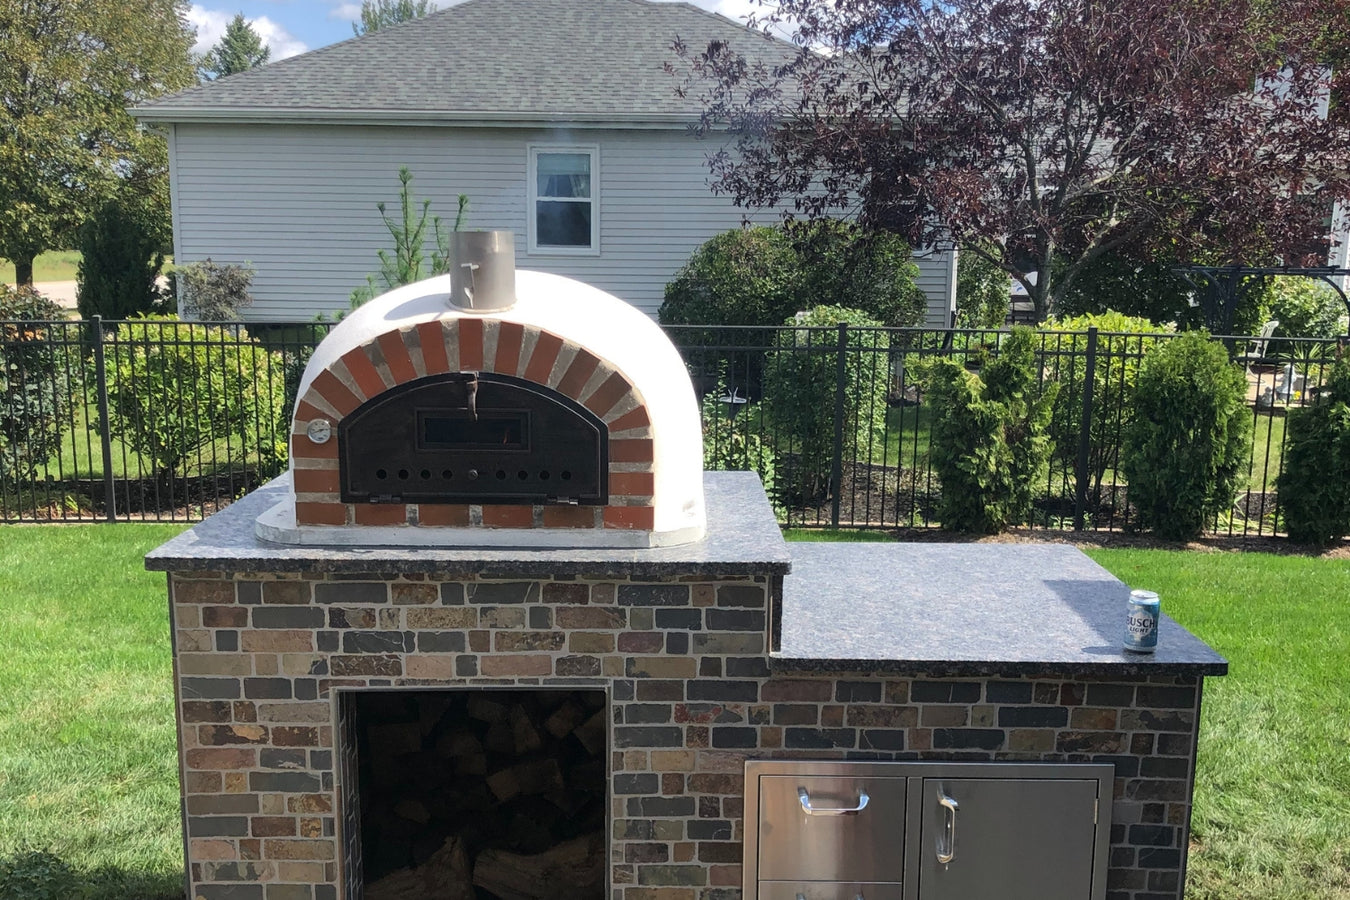 authentic pizza oven which is from the traditional range with brick bench and log storage underneat in back yard